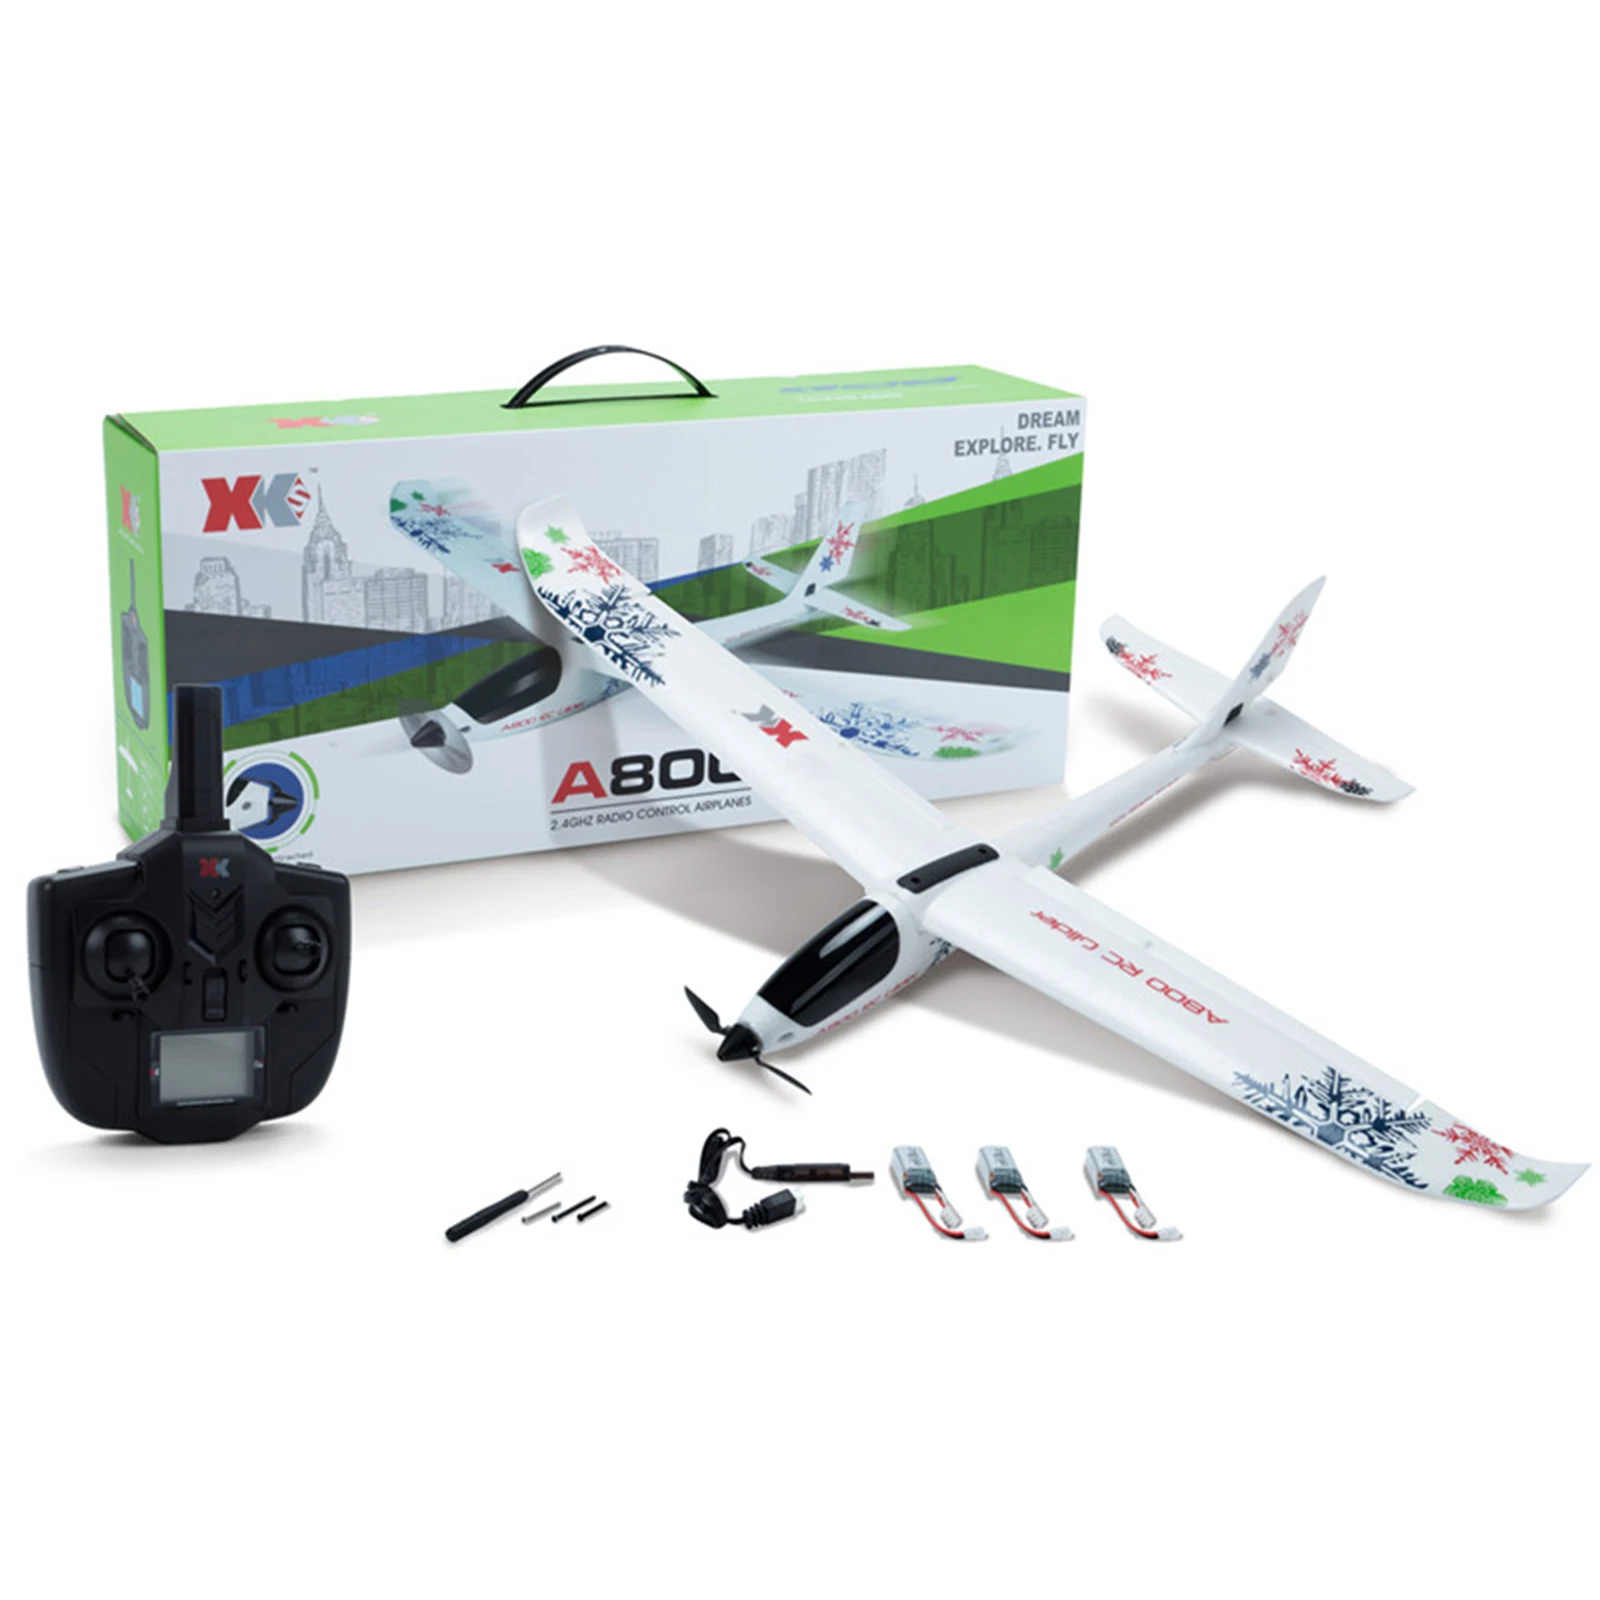 Wltoys XK A800 RC Airplane Remote Control Assembly with 2.4G Transmitter 5CH Electric Remote Control Plane RTF Model Toys enlarge